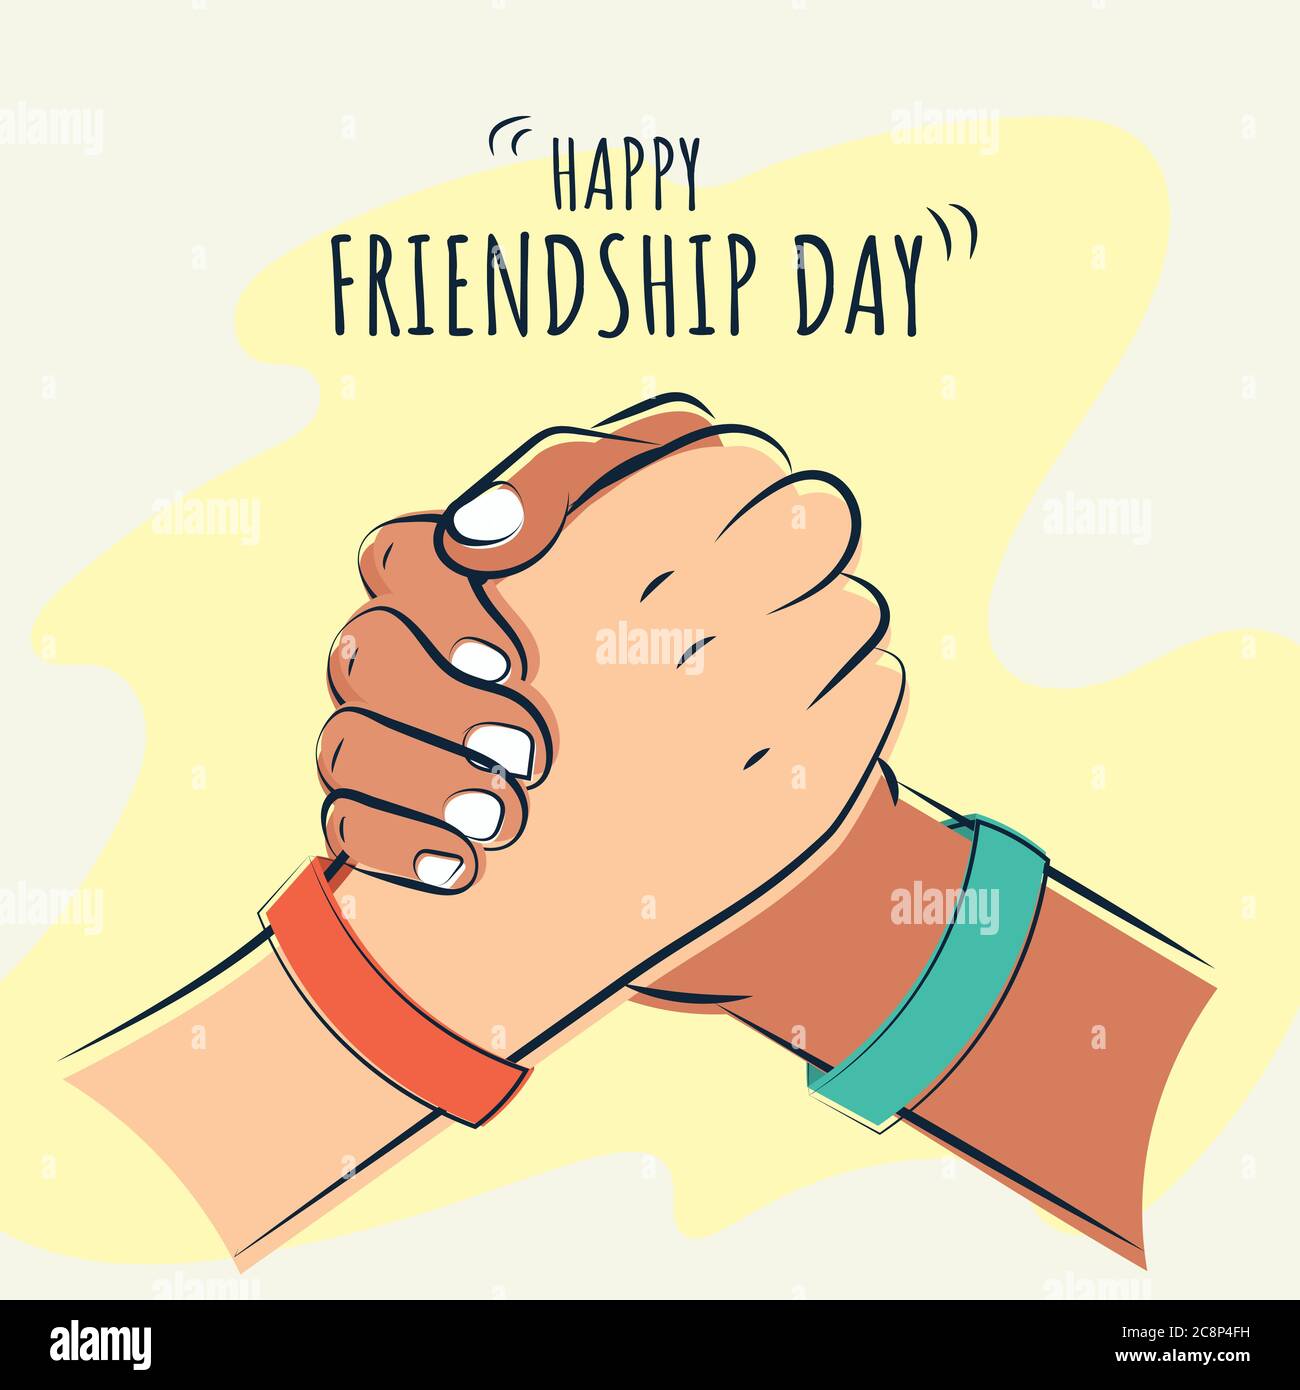 Happy Friendship Day, friends shake hands illustration poster, vector Stock Vector